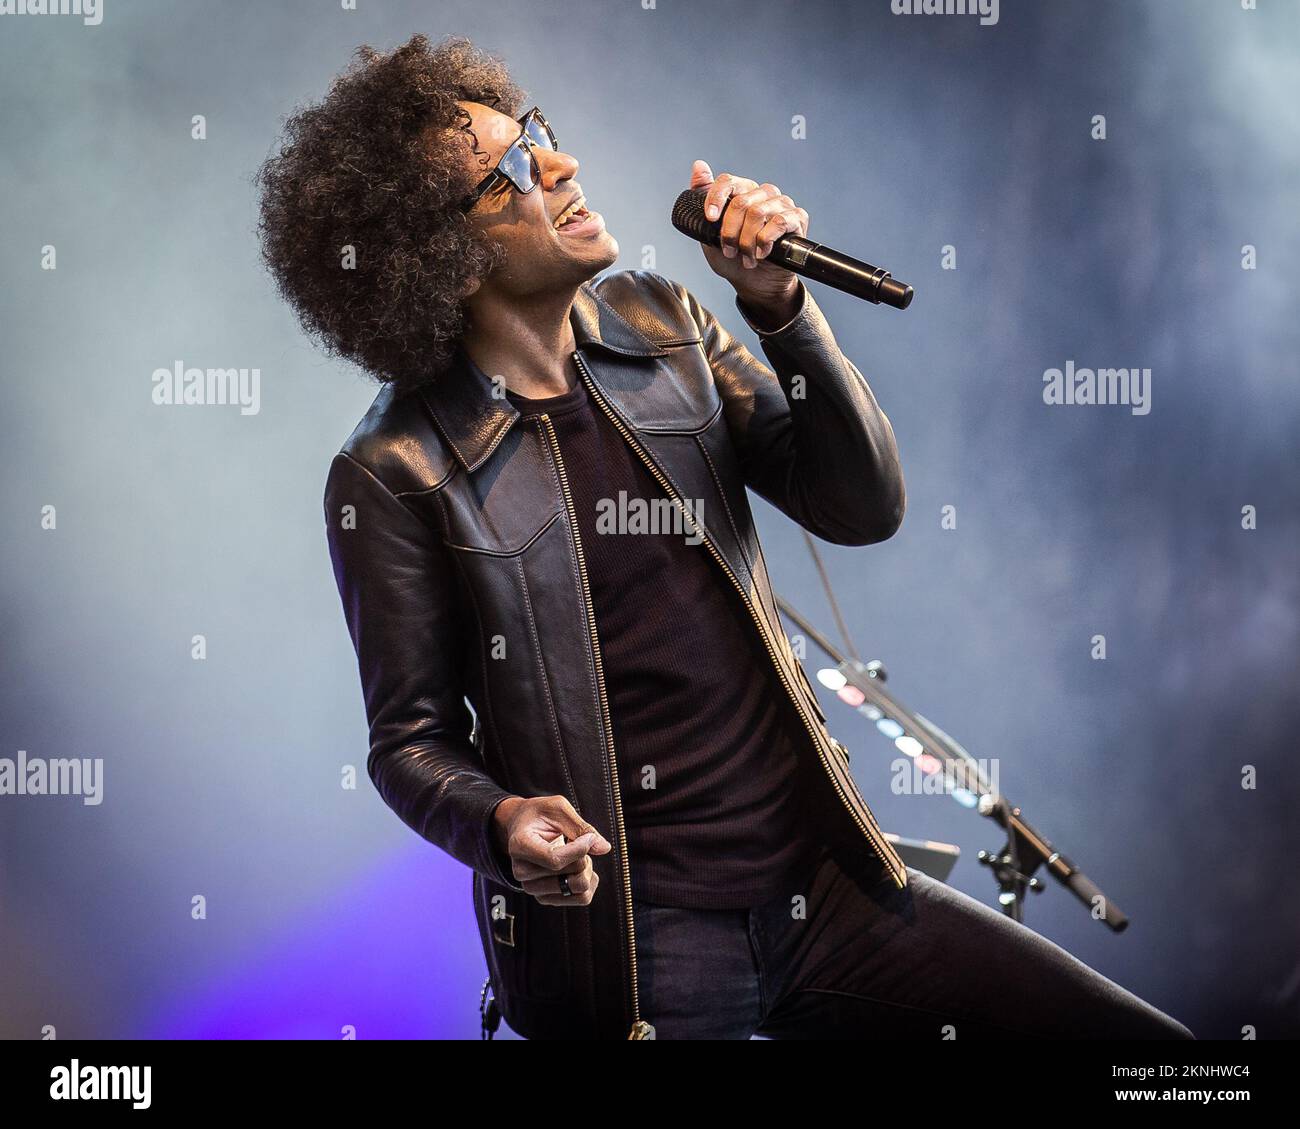 Alice in Chains singer Willian DuVall performing live on stage Stock Photo